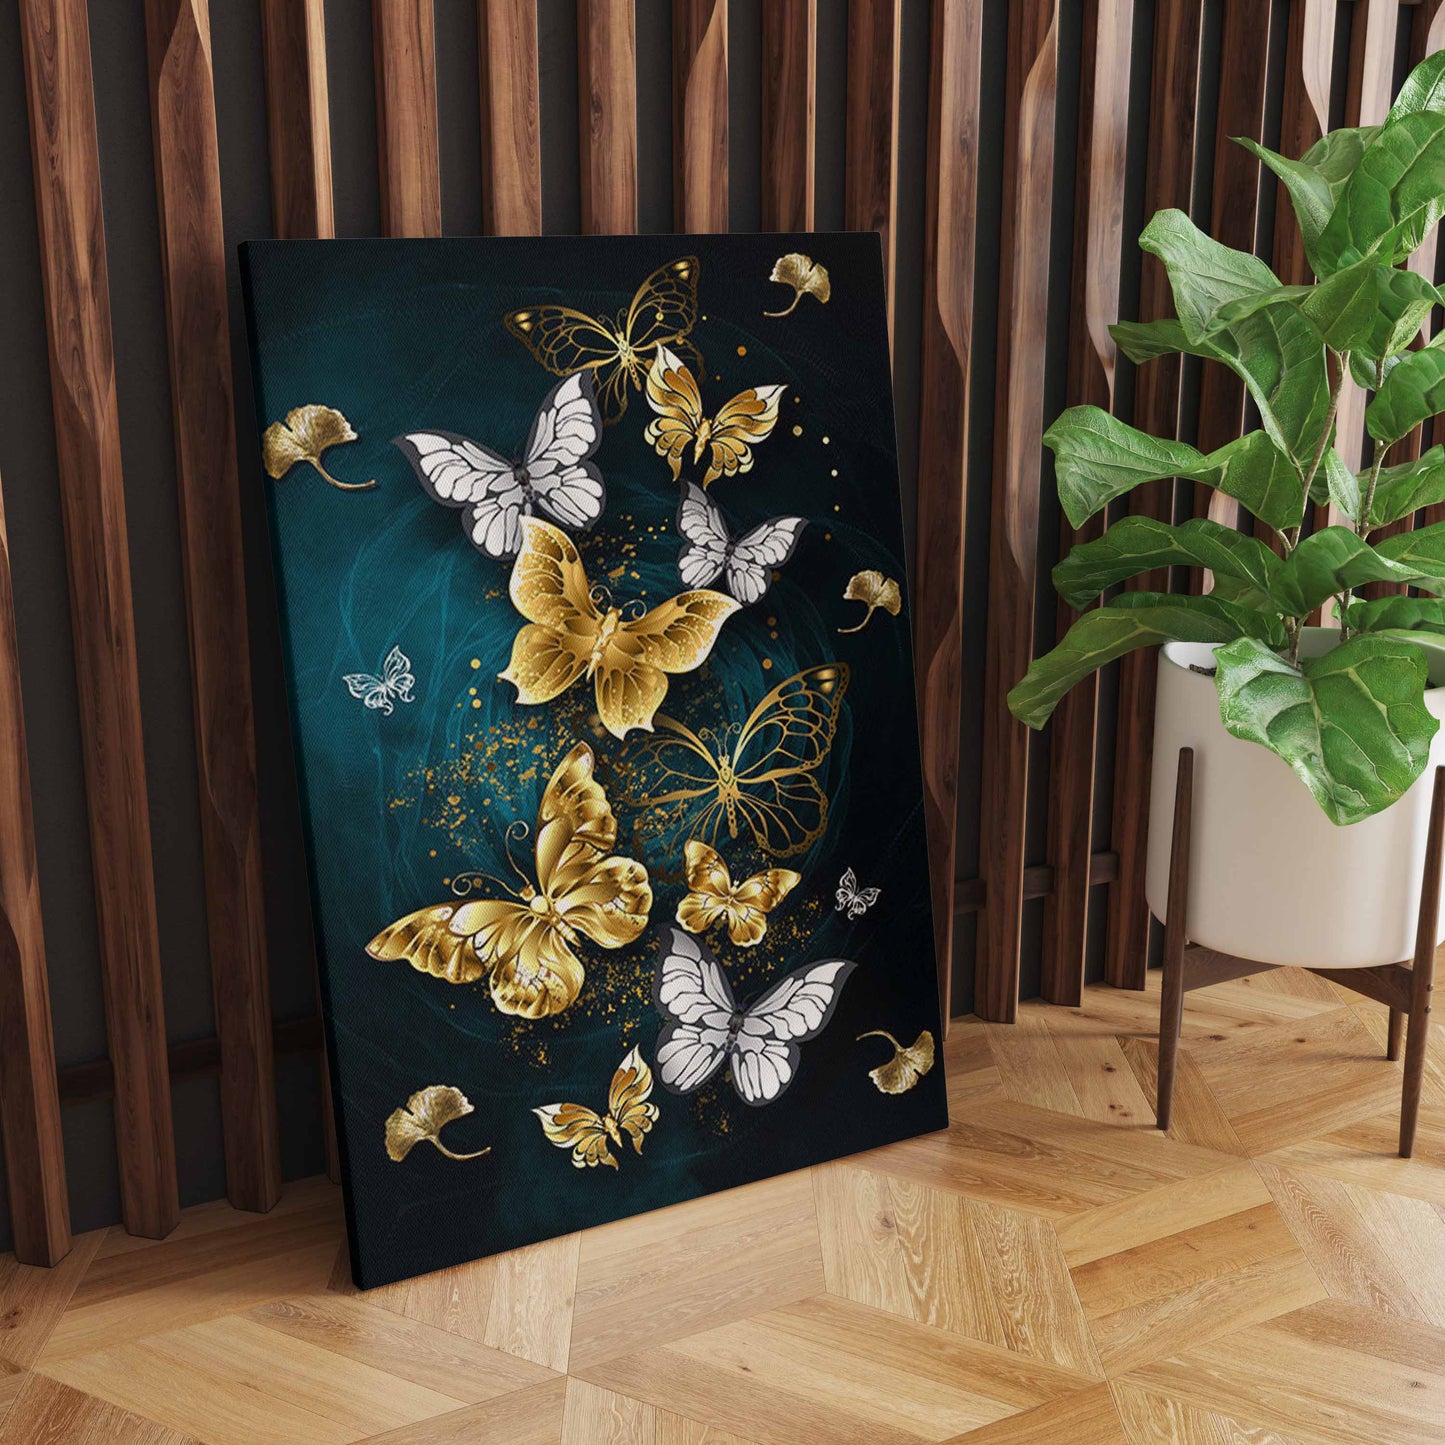 Beautiful Butterflies Art Wall Decor - Set of 3 Tiles with Gold, Blue, Black and White Print on Fabric Wrapped Around Wooden Frame - Perfect for Home or Office Decoration S04E29